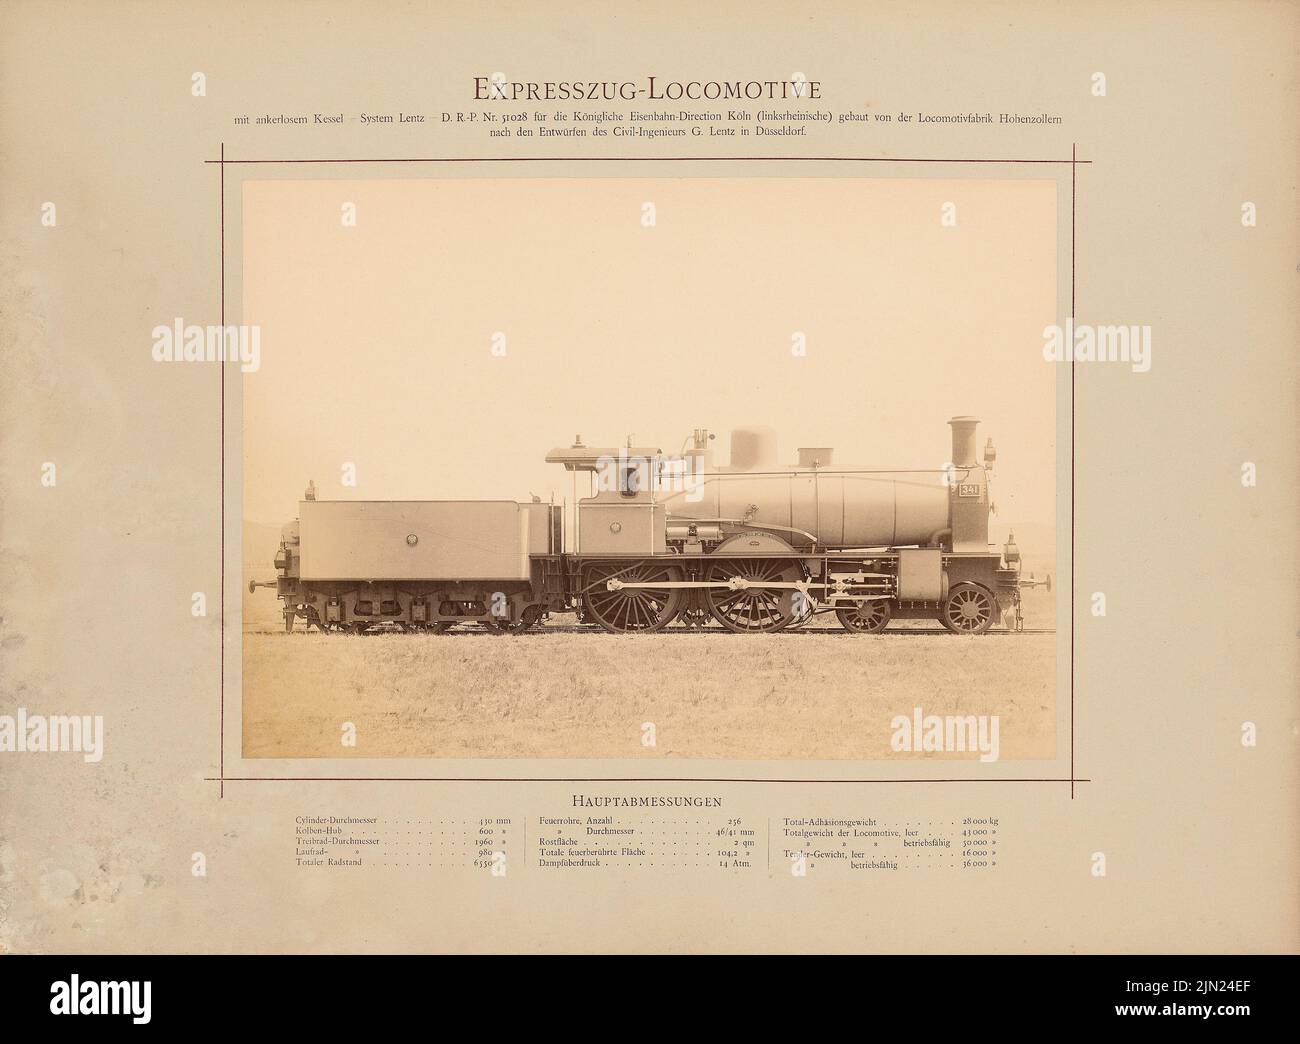 Lentz G., Express Zuglokomotive for the Royal Railway Directions Cologne (without Dat.): View: With anchorless boiler, D.R.-P-No. 51028, built by the Hohenzollern locomotive factory. Photo on cardboard, 47.8 x 65.1 cm (including scan edges) Stock Photo